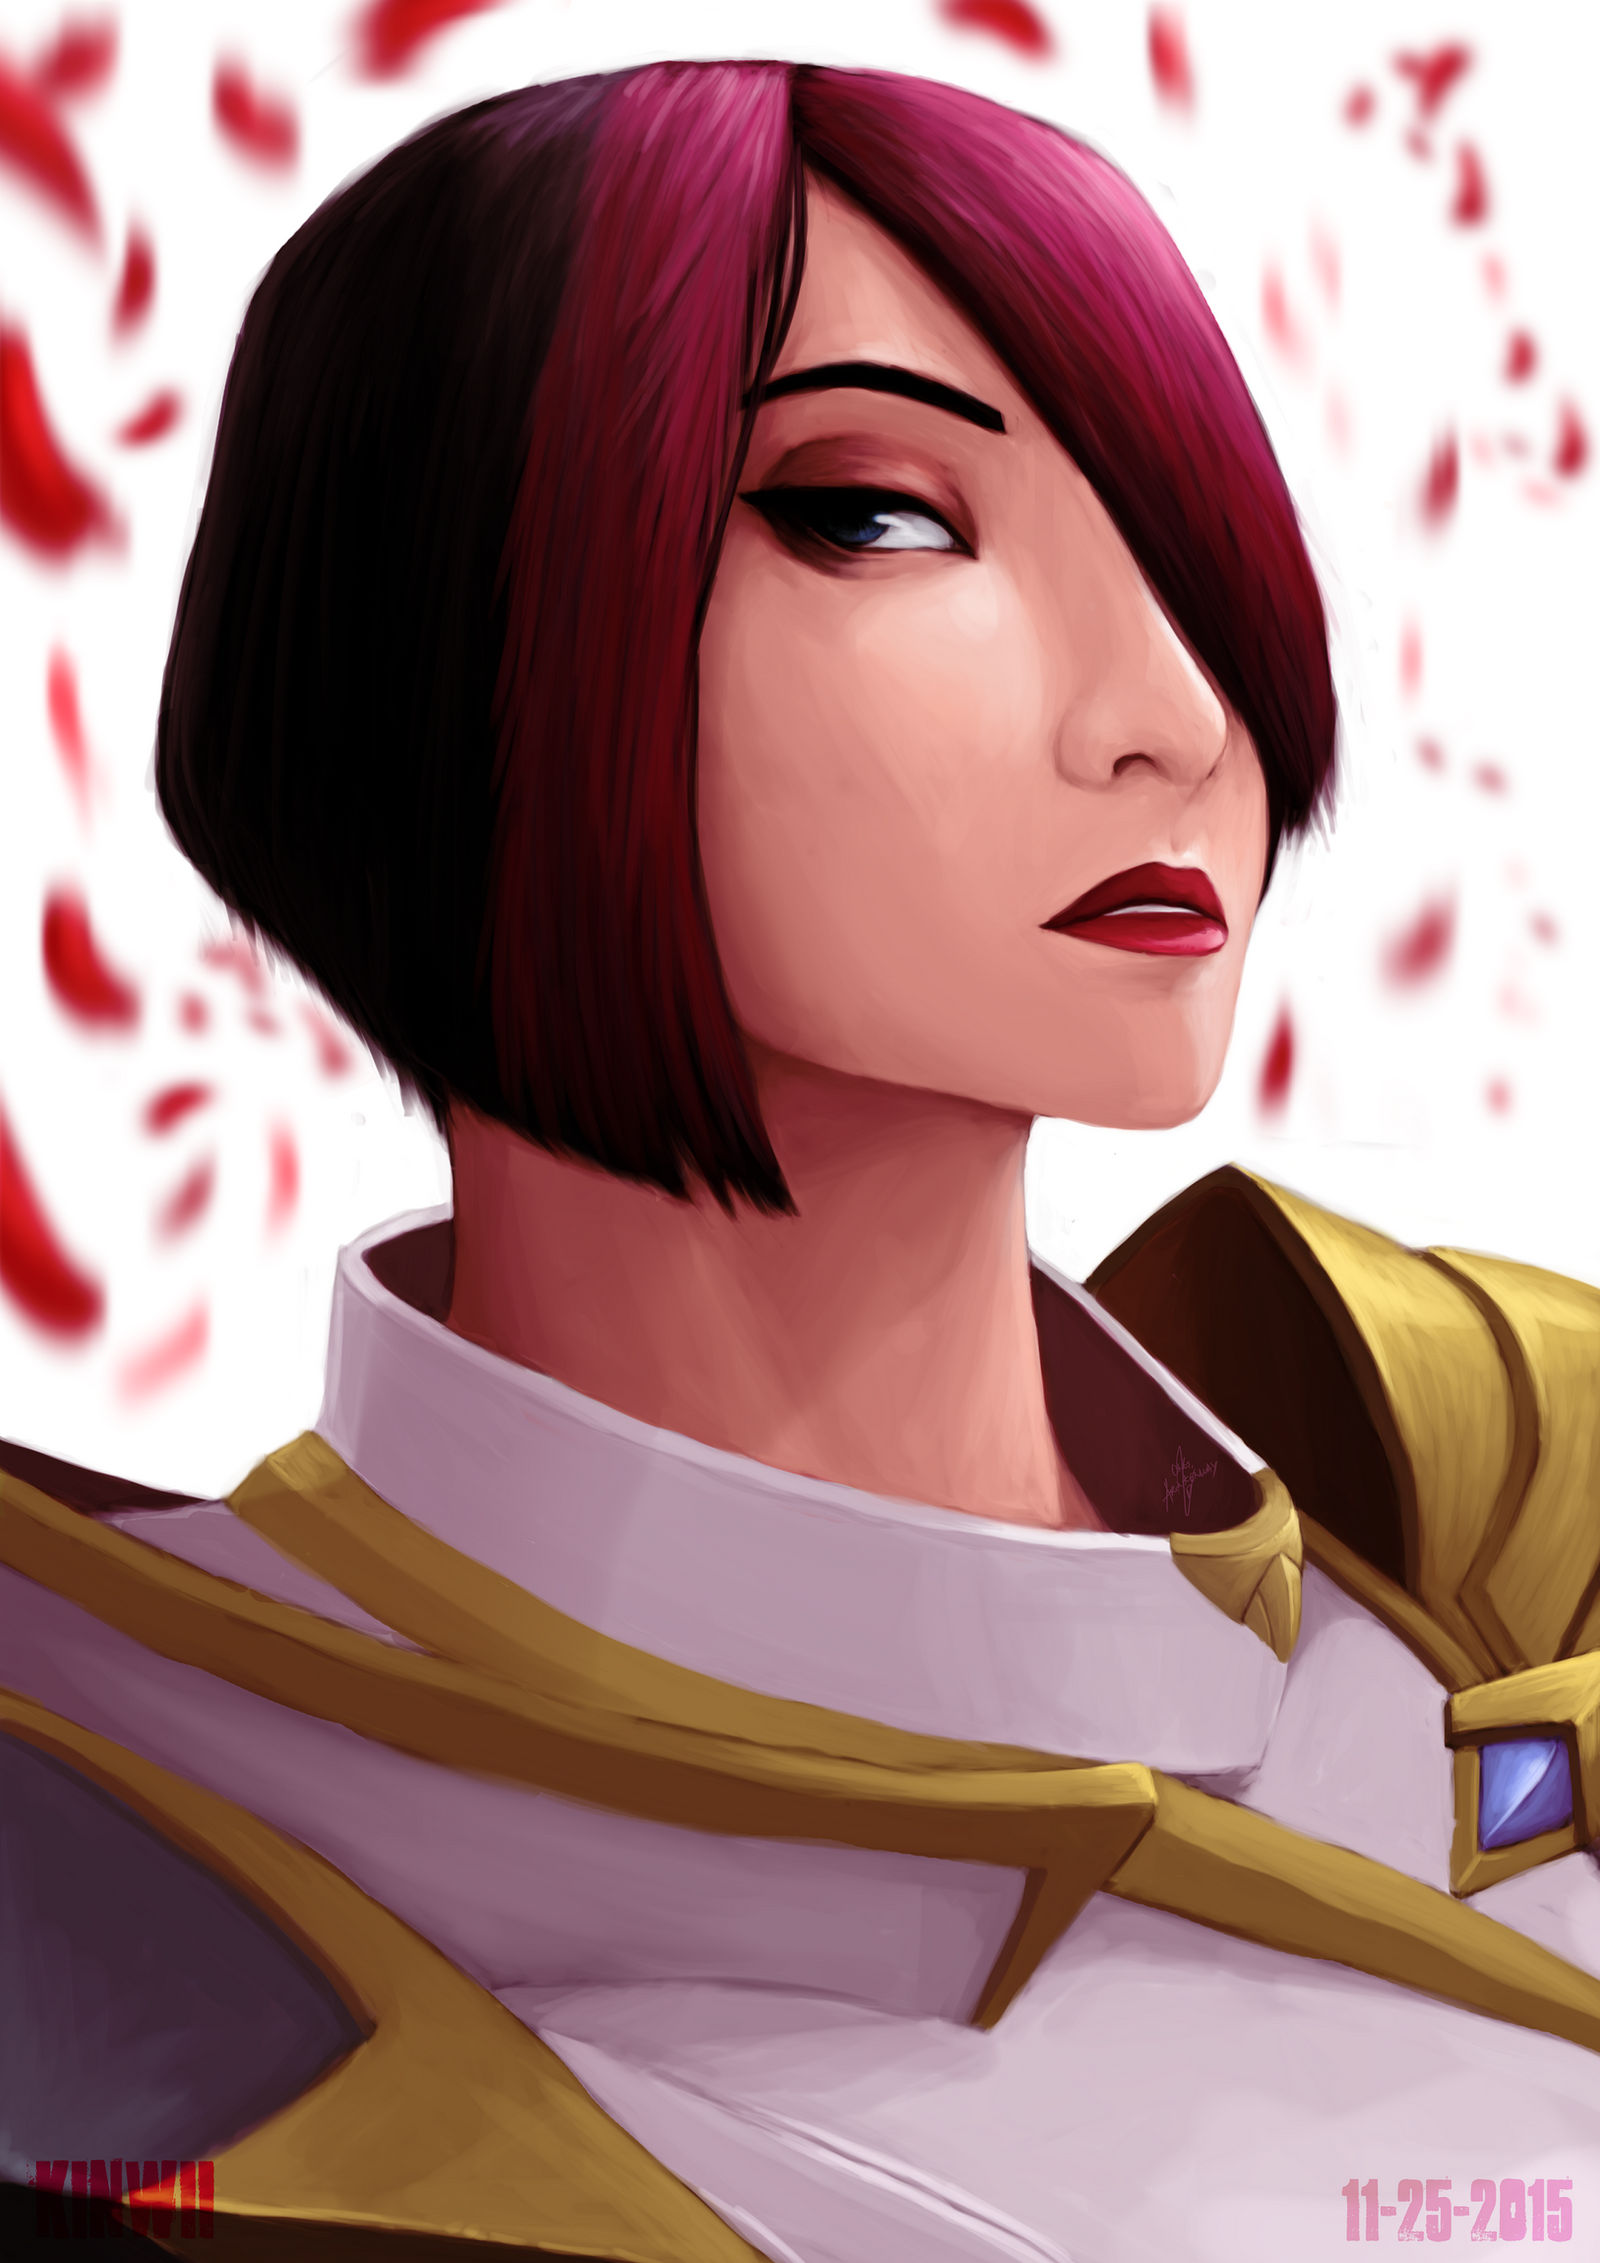 Your move - Fiora the Grand Duelist